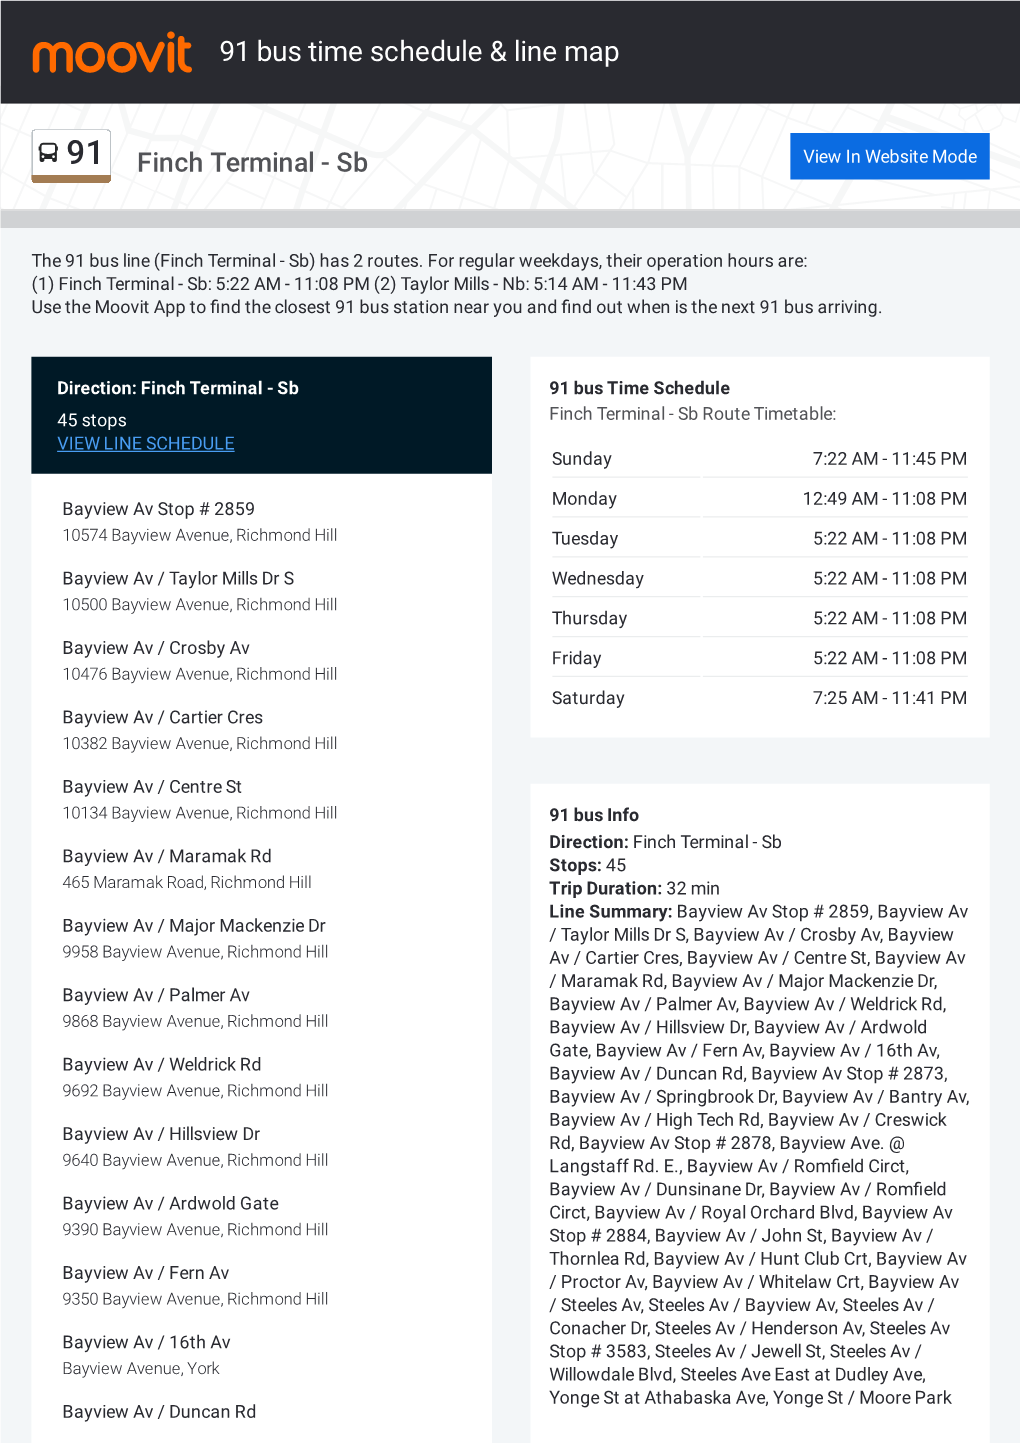 91 Bus Time Schedule & Line Route